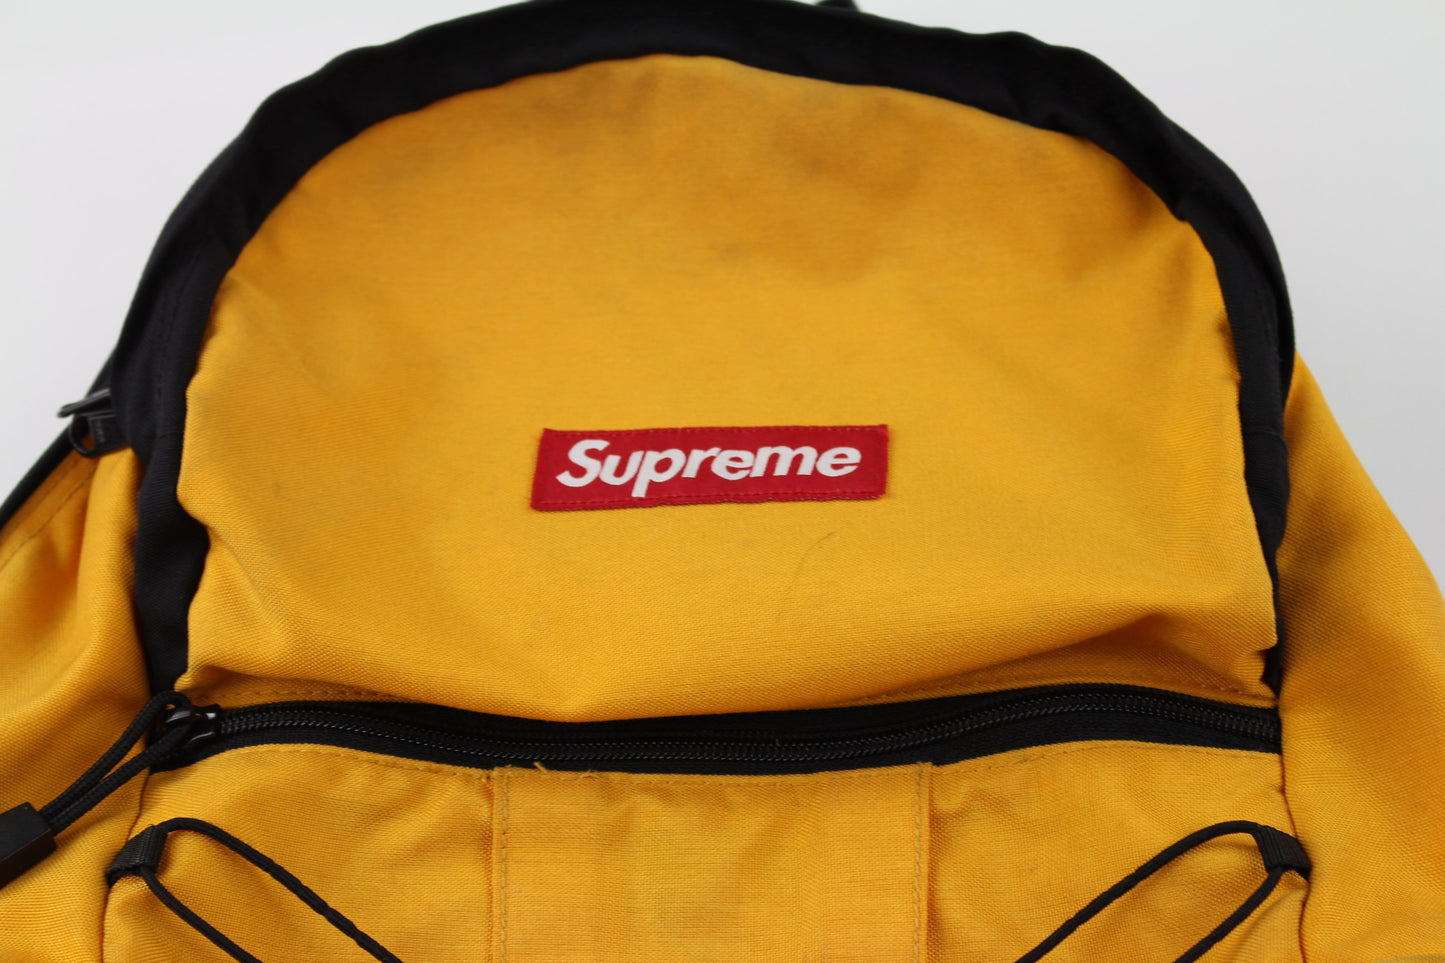 Supreme Backpack Yellow Cross xxx 2011 - SaruGeneral